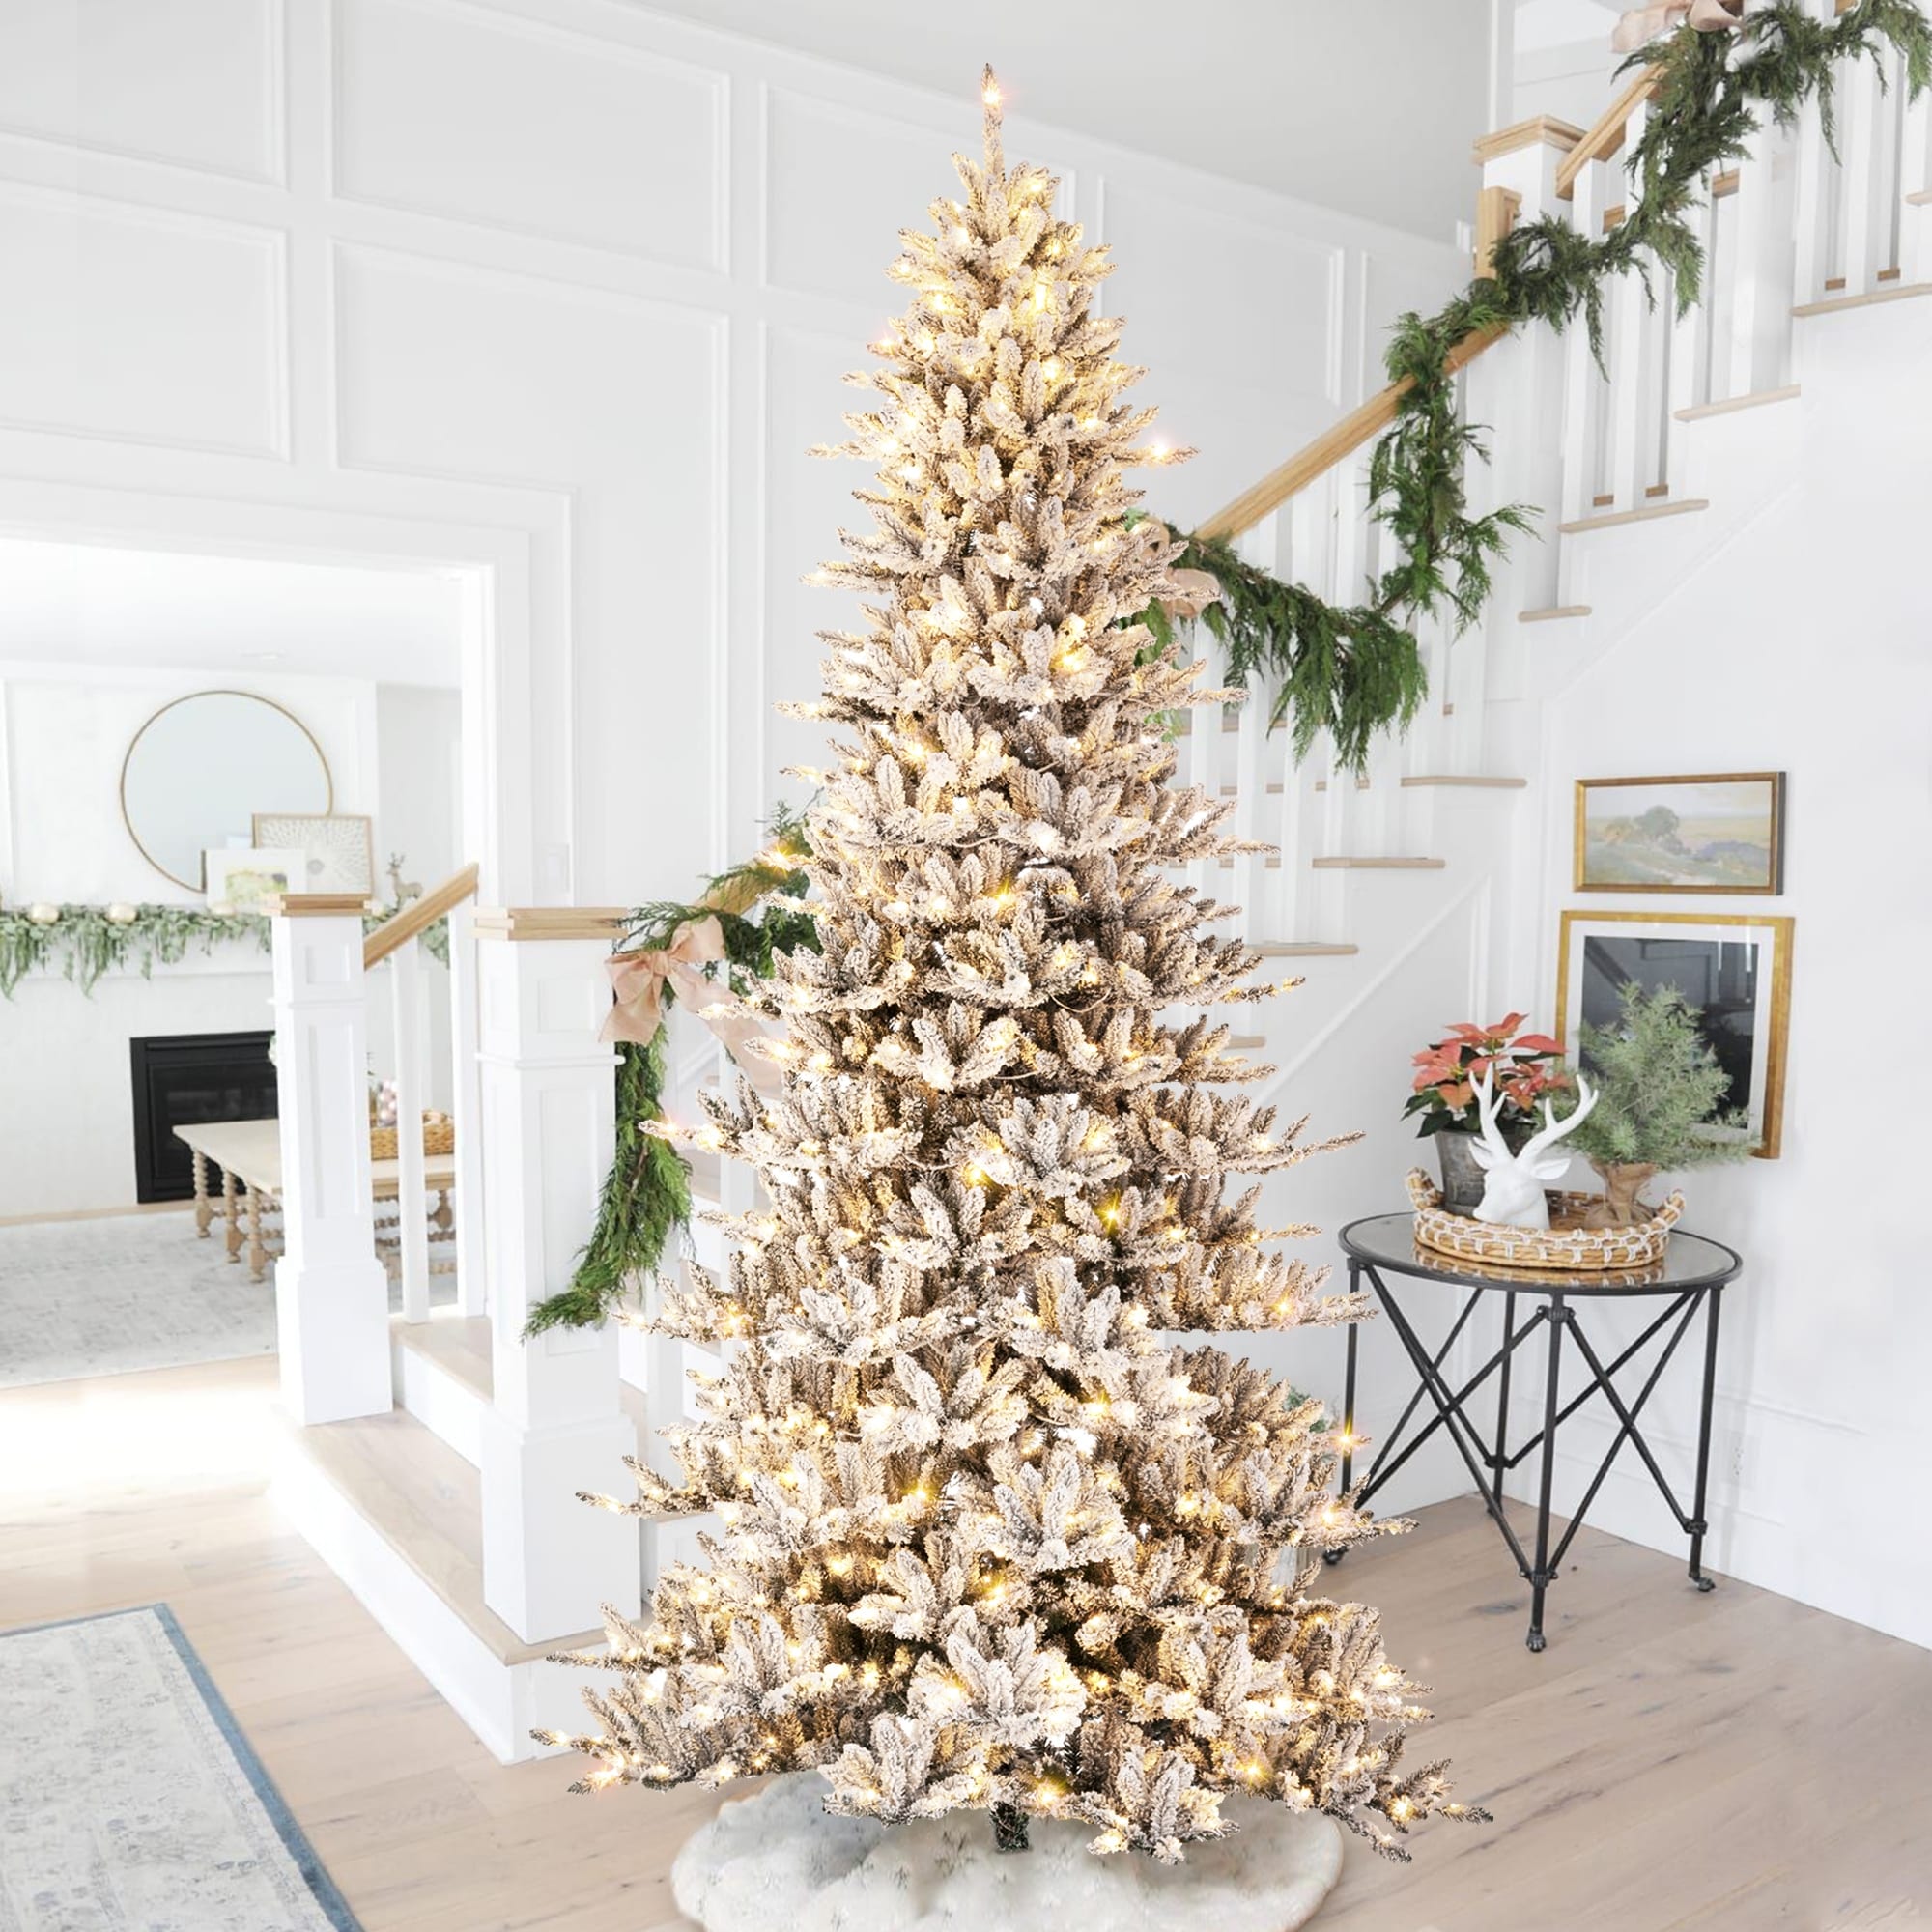 https://ak1.ostkcdn.com/images/products/is/images/direct/f0c5ef84cb6b4c181ee4da1a95cf2dba24c8d48a/Glitzhome-11ft-Pre-Lit-Flocked-Slim-Fir-Artificial-Christmas-Tree-with-950-Warm-White-Lights.jpg